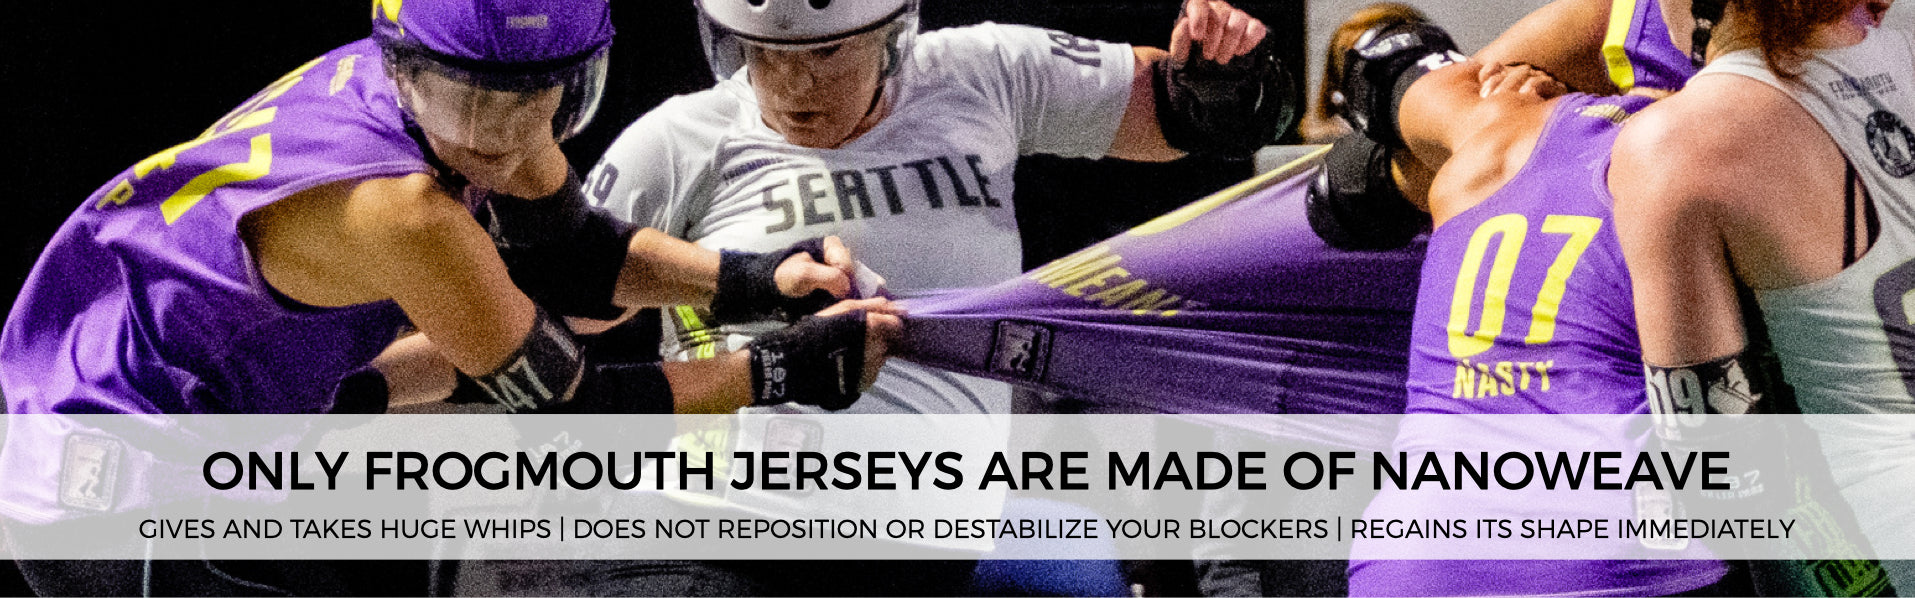 Only Frogmouth Custom Roller Derby Jerseys are Made of Nanoweave, which gives the best whips by stretching right across the width of the track without destabilizing or repositioning your blockers